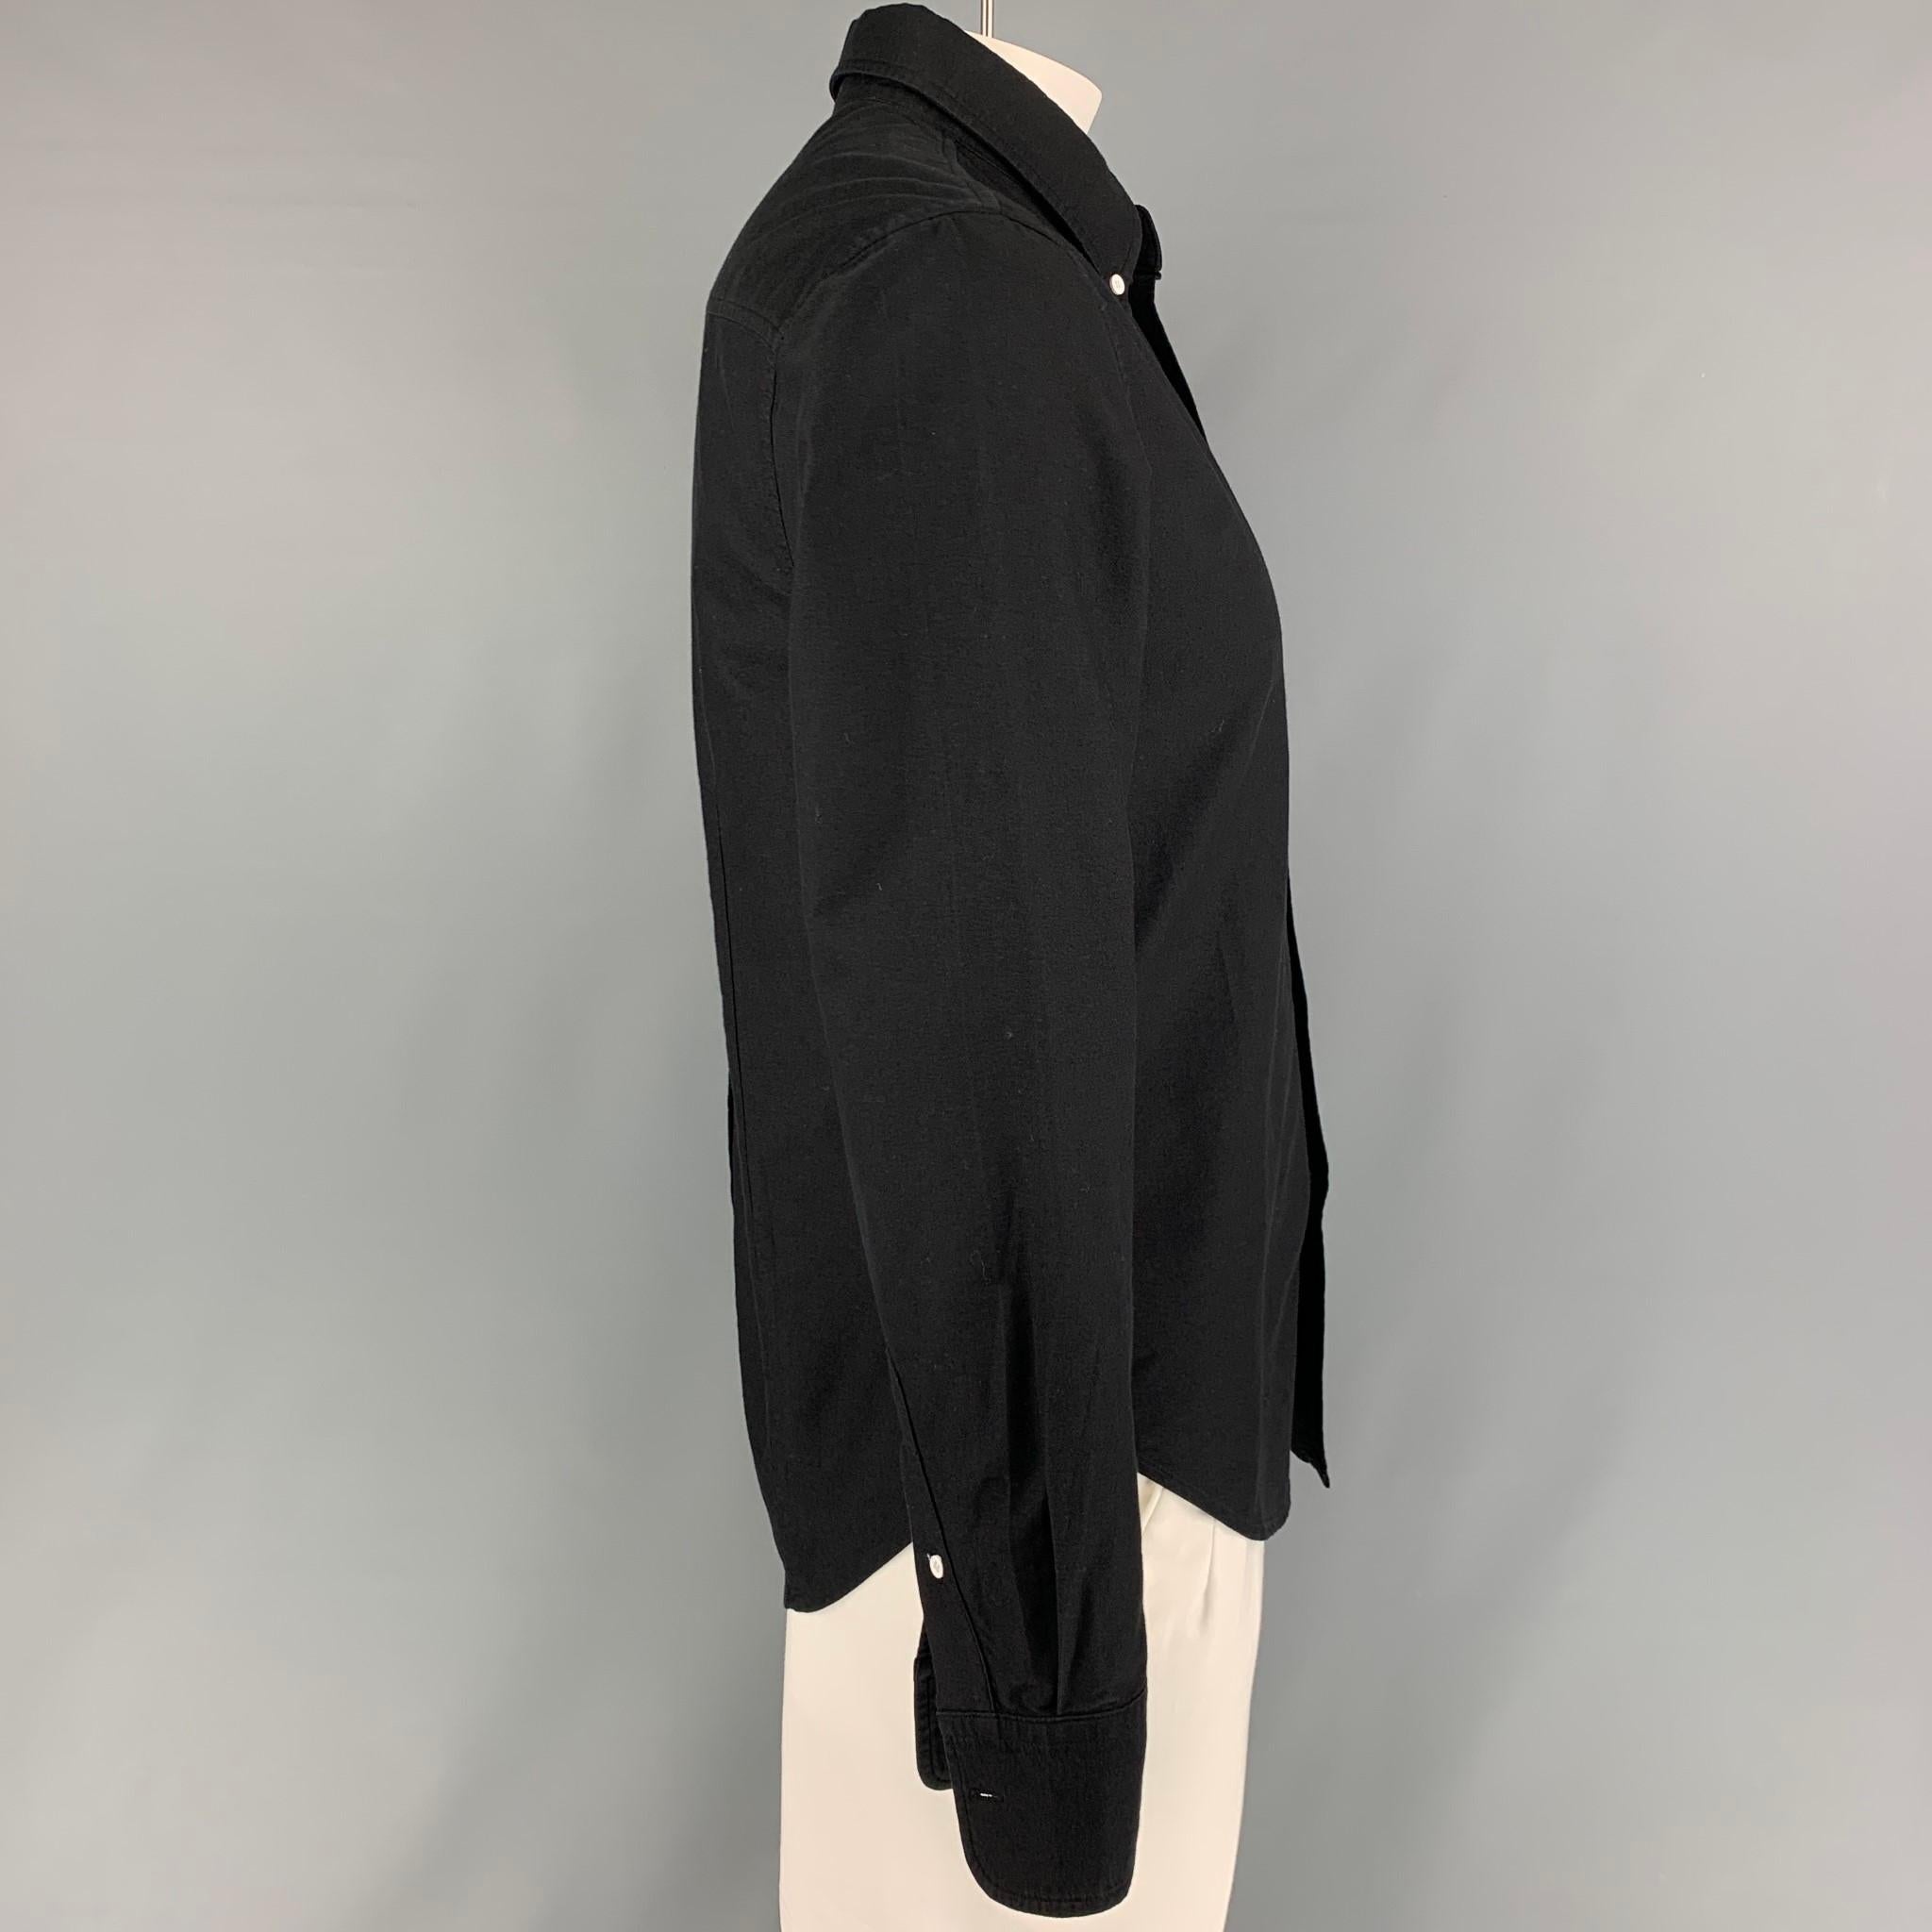 BAND OF OUTSIDERS long sleeve shirt comes in a black cotton featuring a button down collar, patch pocket, and a button up closure. 

Very Good Pre-Owned Condition.
Marked: L

Measurements:

Shoulder: 18 in.
Chest: 40 in.
Sleeve: 26 in.
Length: 28.5